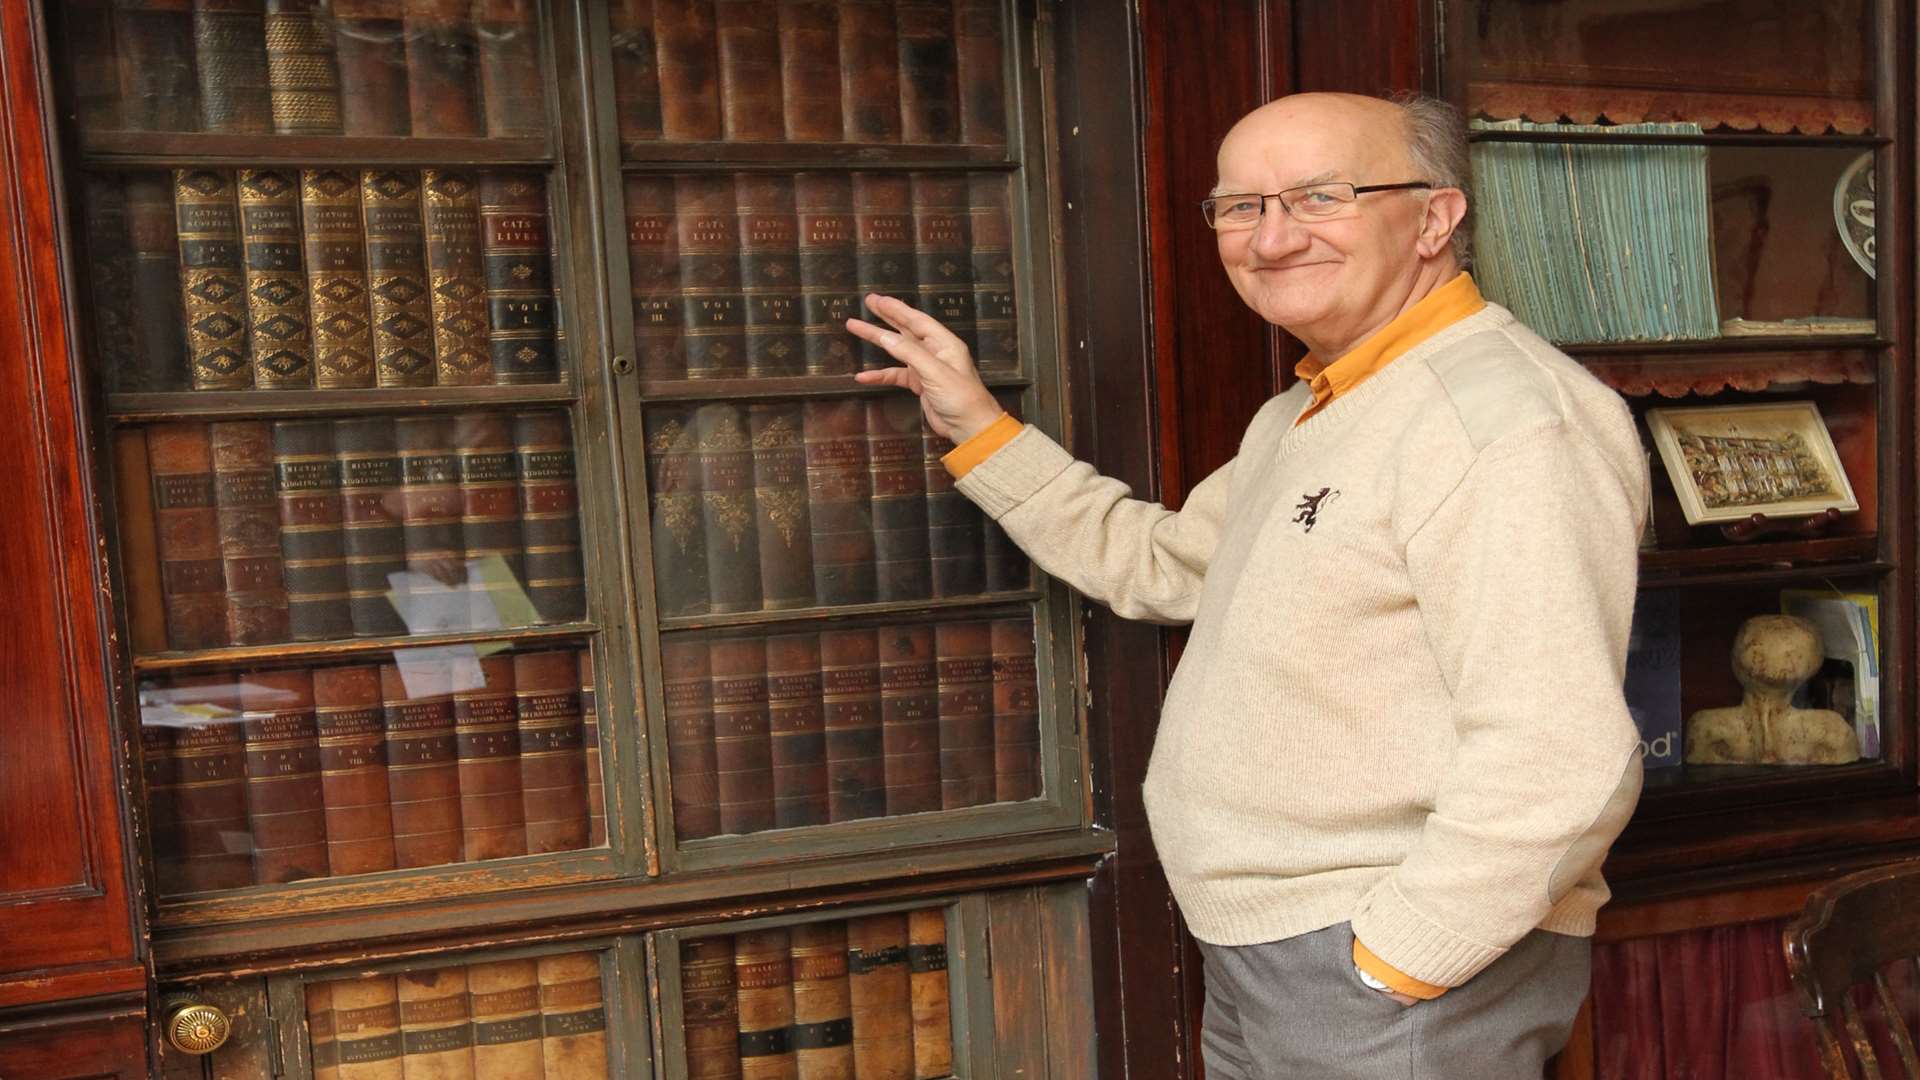 Norman Munn, on the Board of Trustees and a tour guide of Gads Hill Upper School, shows off Dickens's unusual study door. Picture: John Westhrop